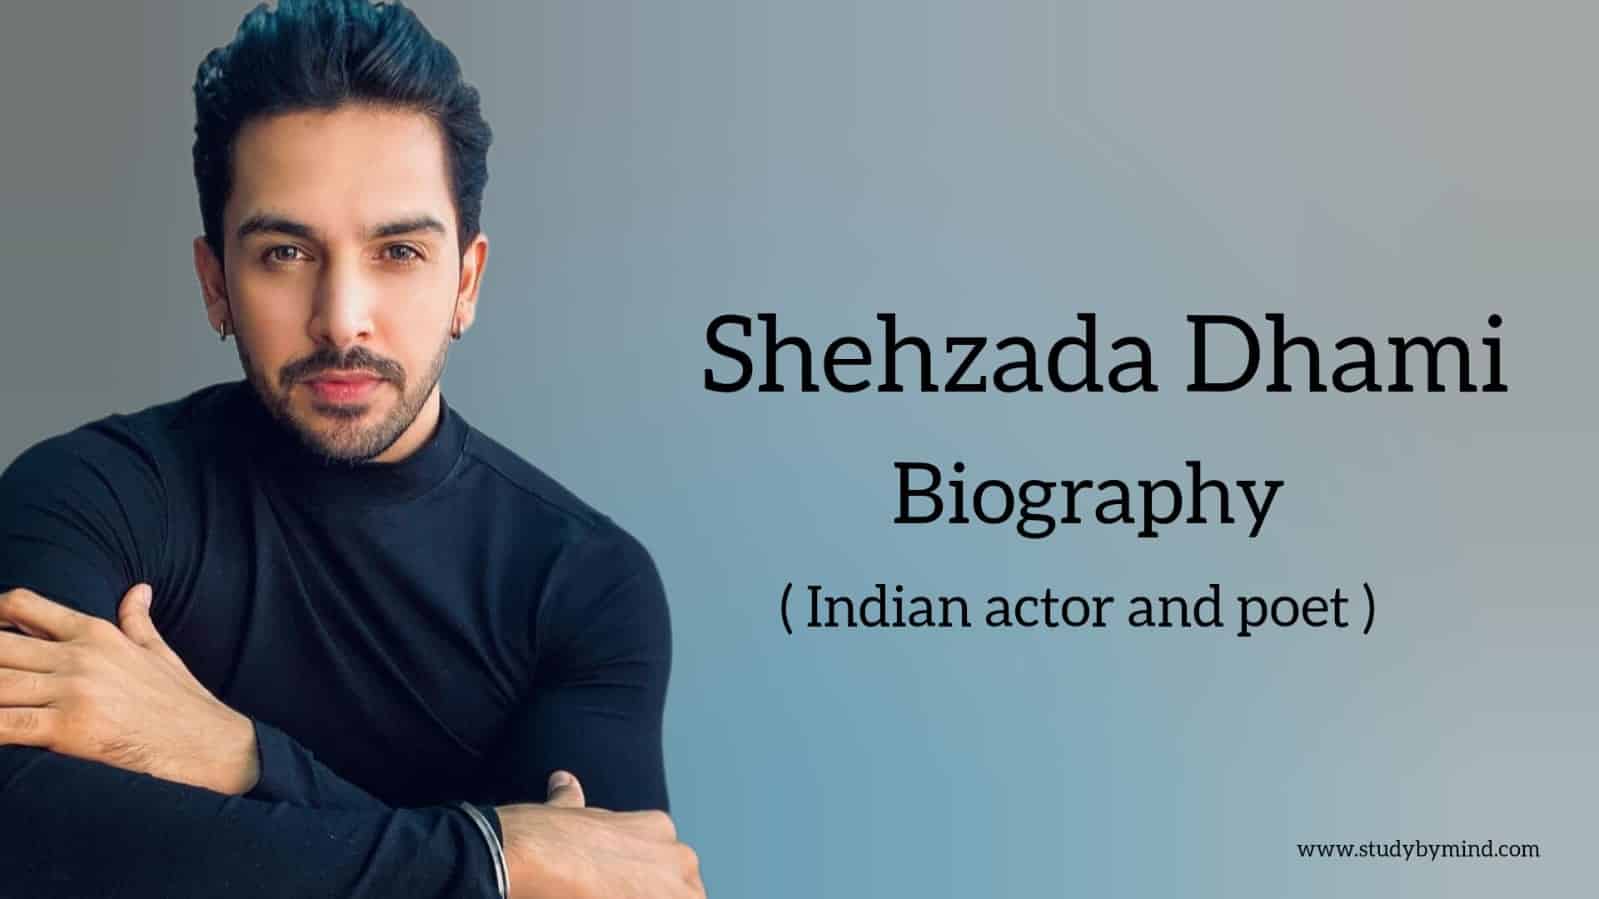 You are currently viewing Shehzada dhami biography in english (Indian Actor)